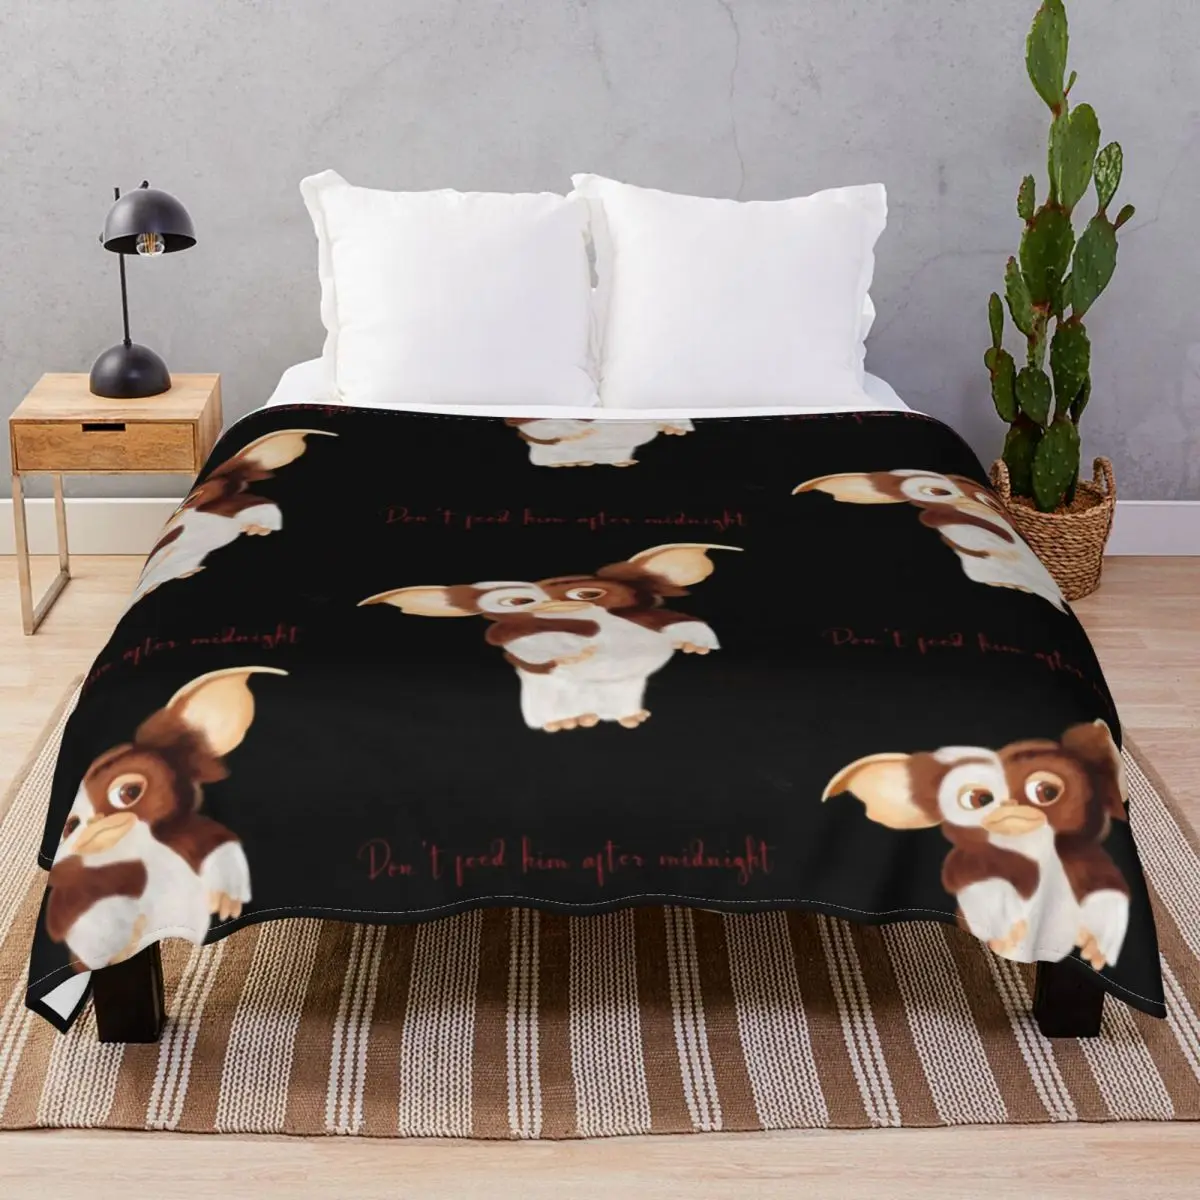 GizmoGremlins Movie Blankets Flannel All Season Soft Throw Blanket for Bed Home Couch Travel Cinema